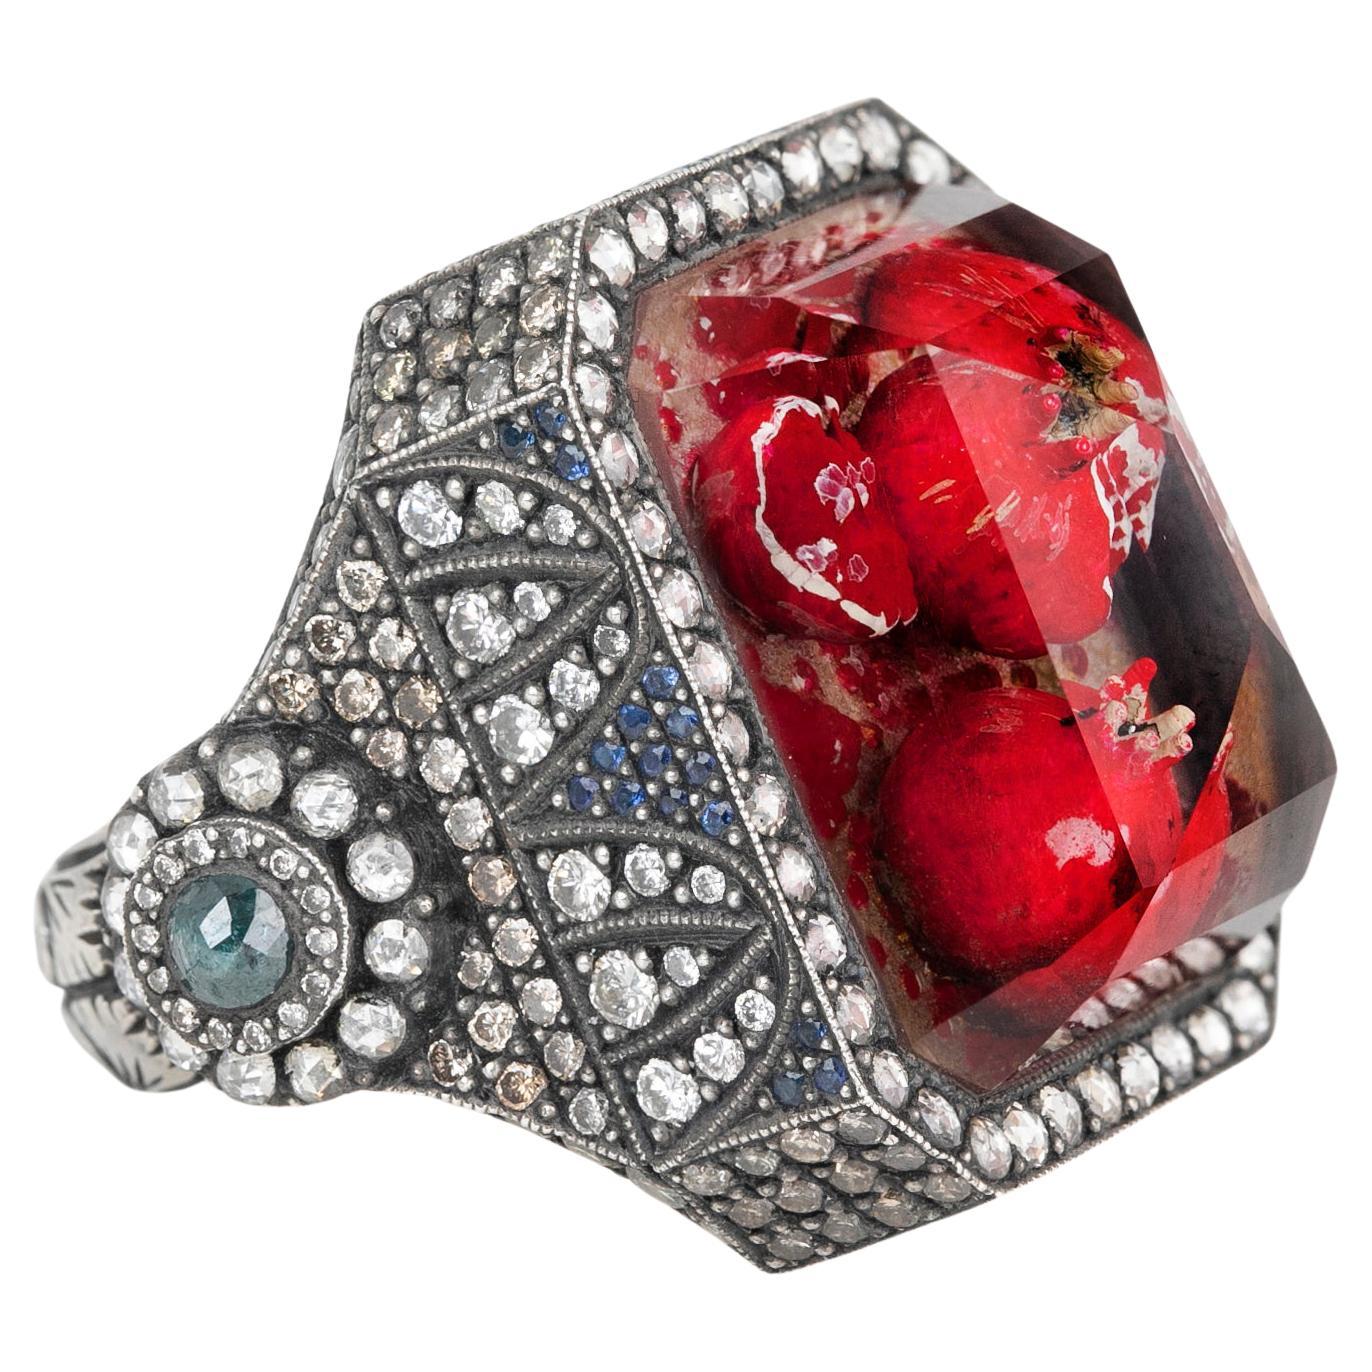 24k Gold and 925K Silver Carved Pomegranate Ring with 1.15 Ct Diamond